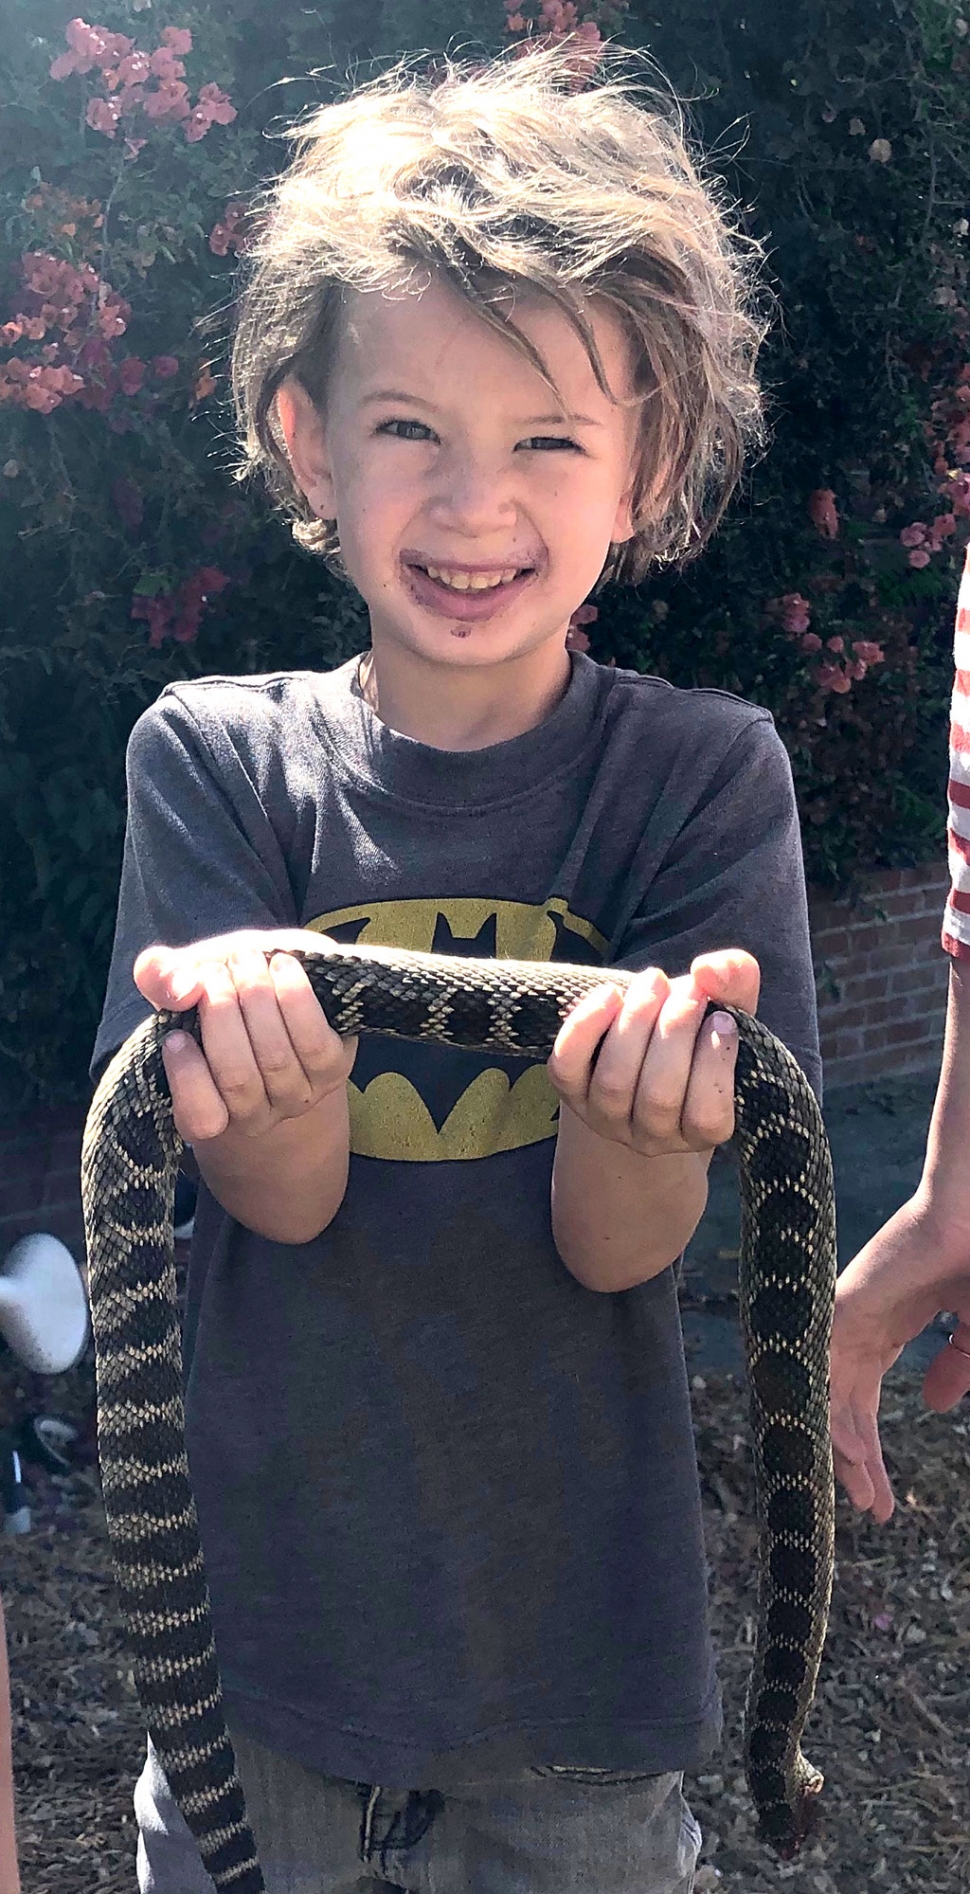 Joseph Fike, 5, who is brave enough to handle the large deadly snake.